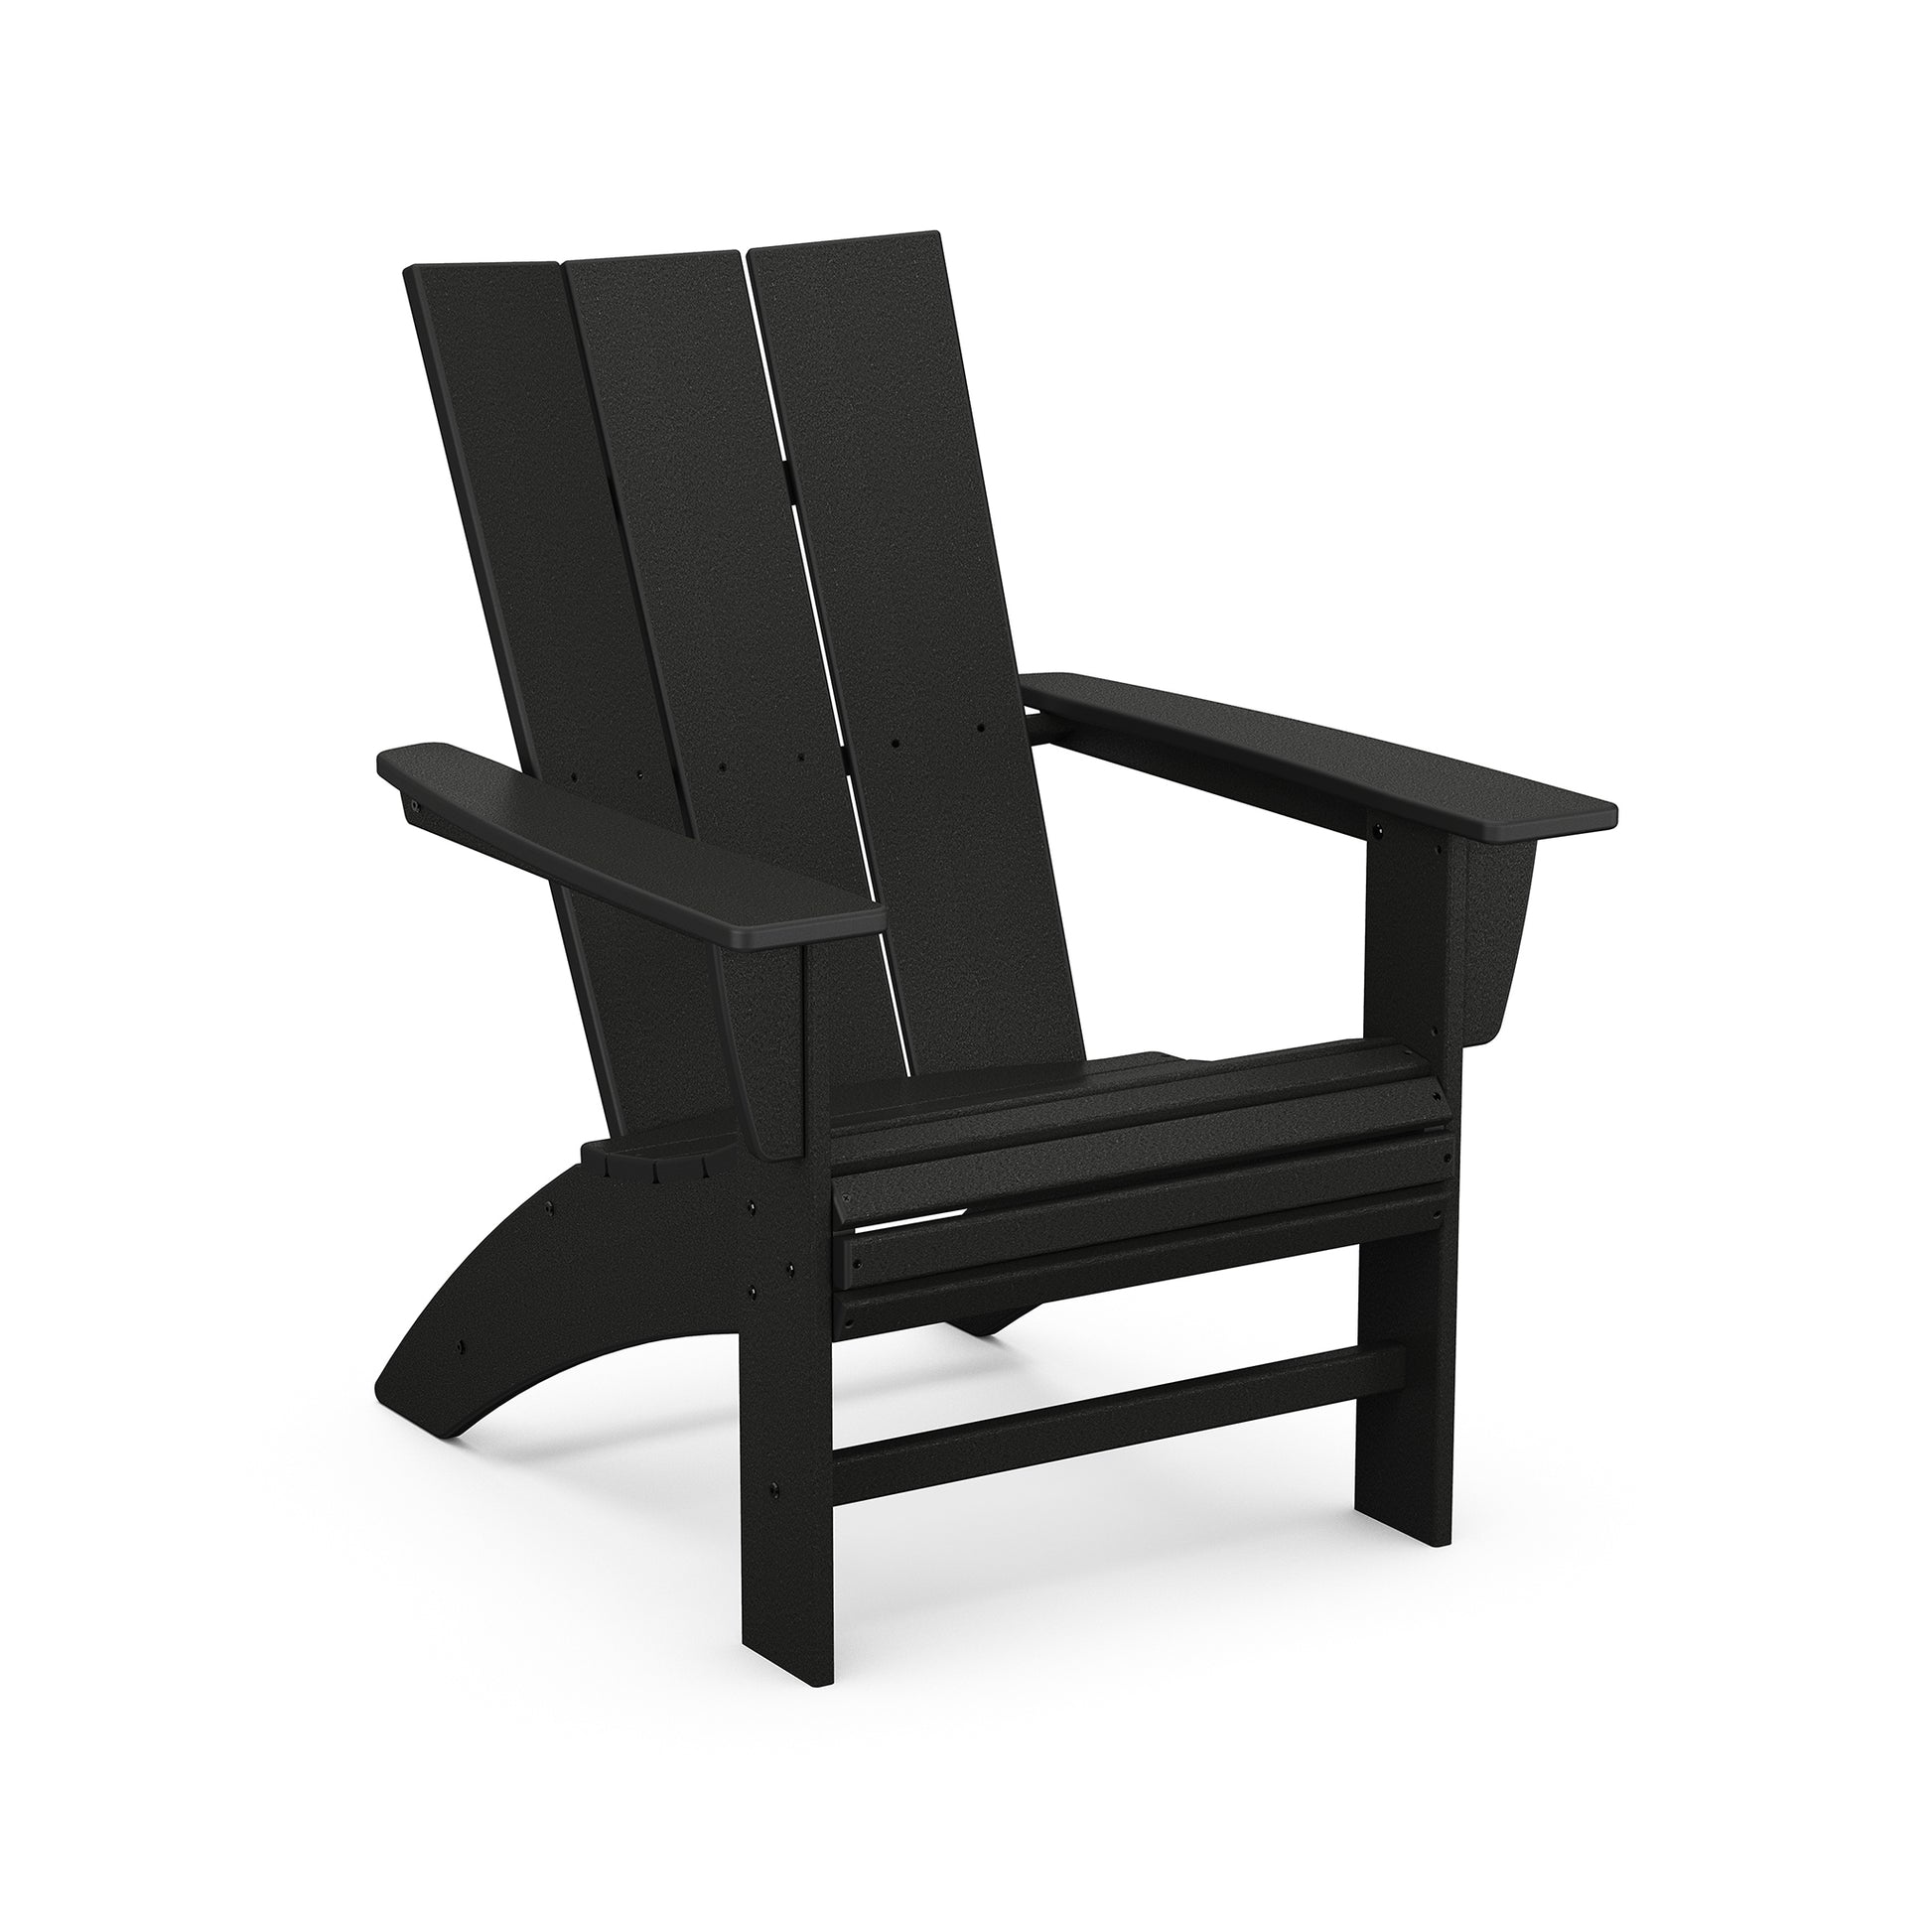 A black outdoor POLYWOOD Modern Curveback Adirondack Chair made of POLYWOOD lumber with broad flat arms and a slanted back, shown against a plain white background.